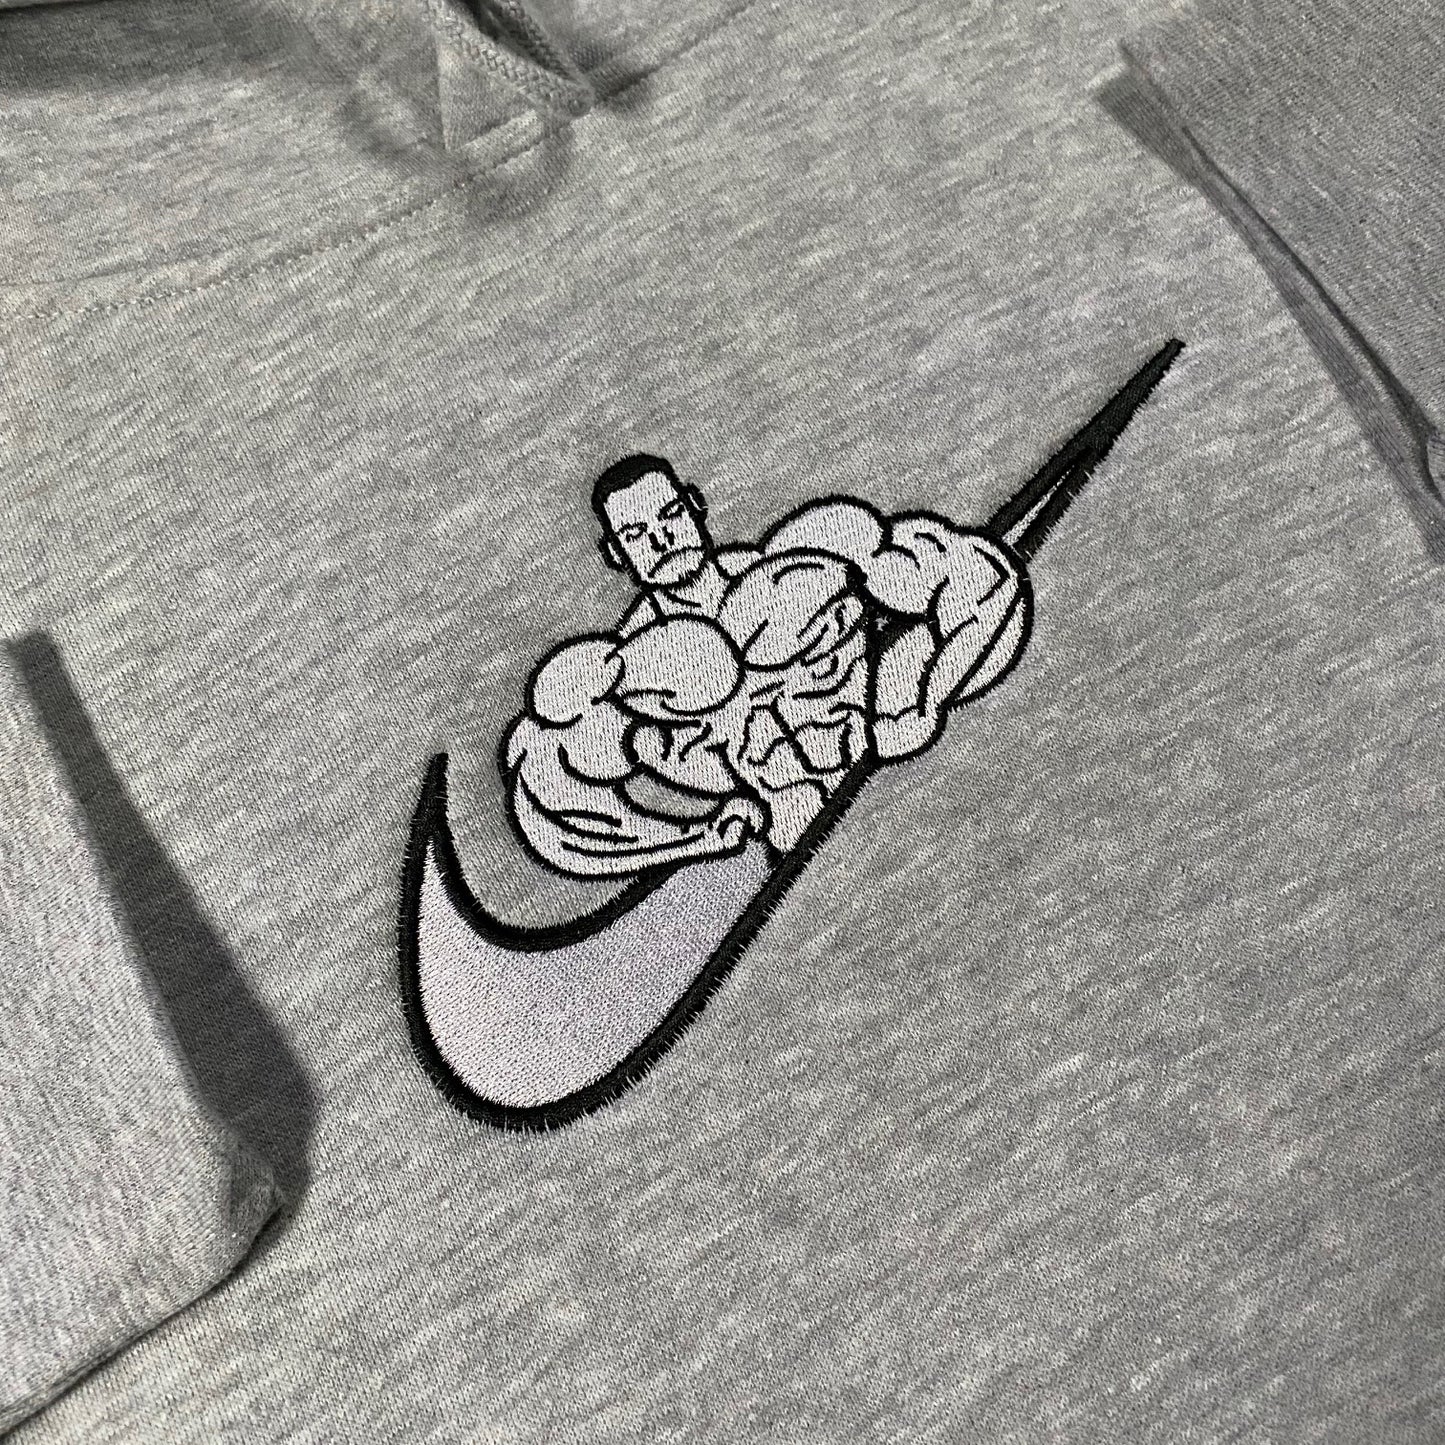 LIMITED Chris "Cbum" Bumstead Mr Olympia EMBROIDERED HOODIE